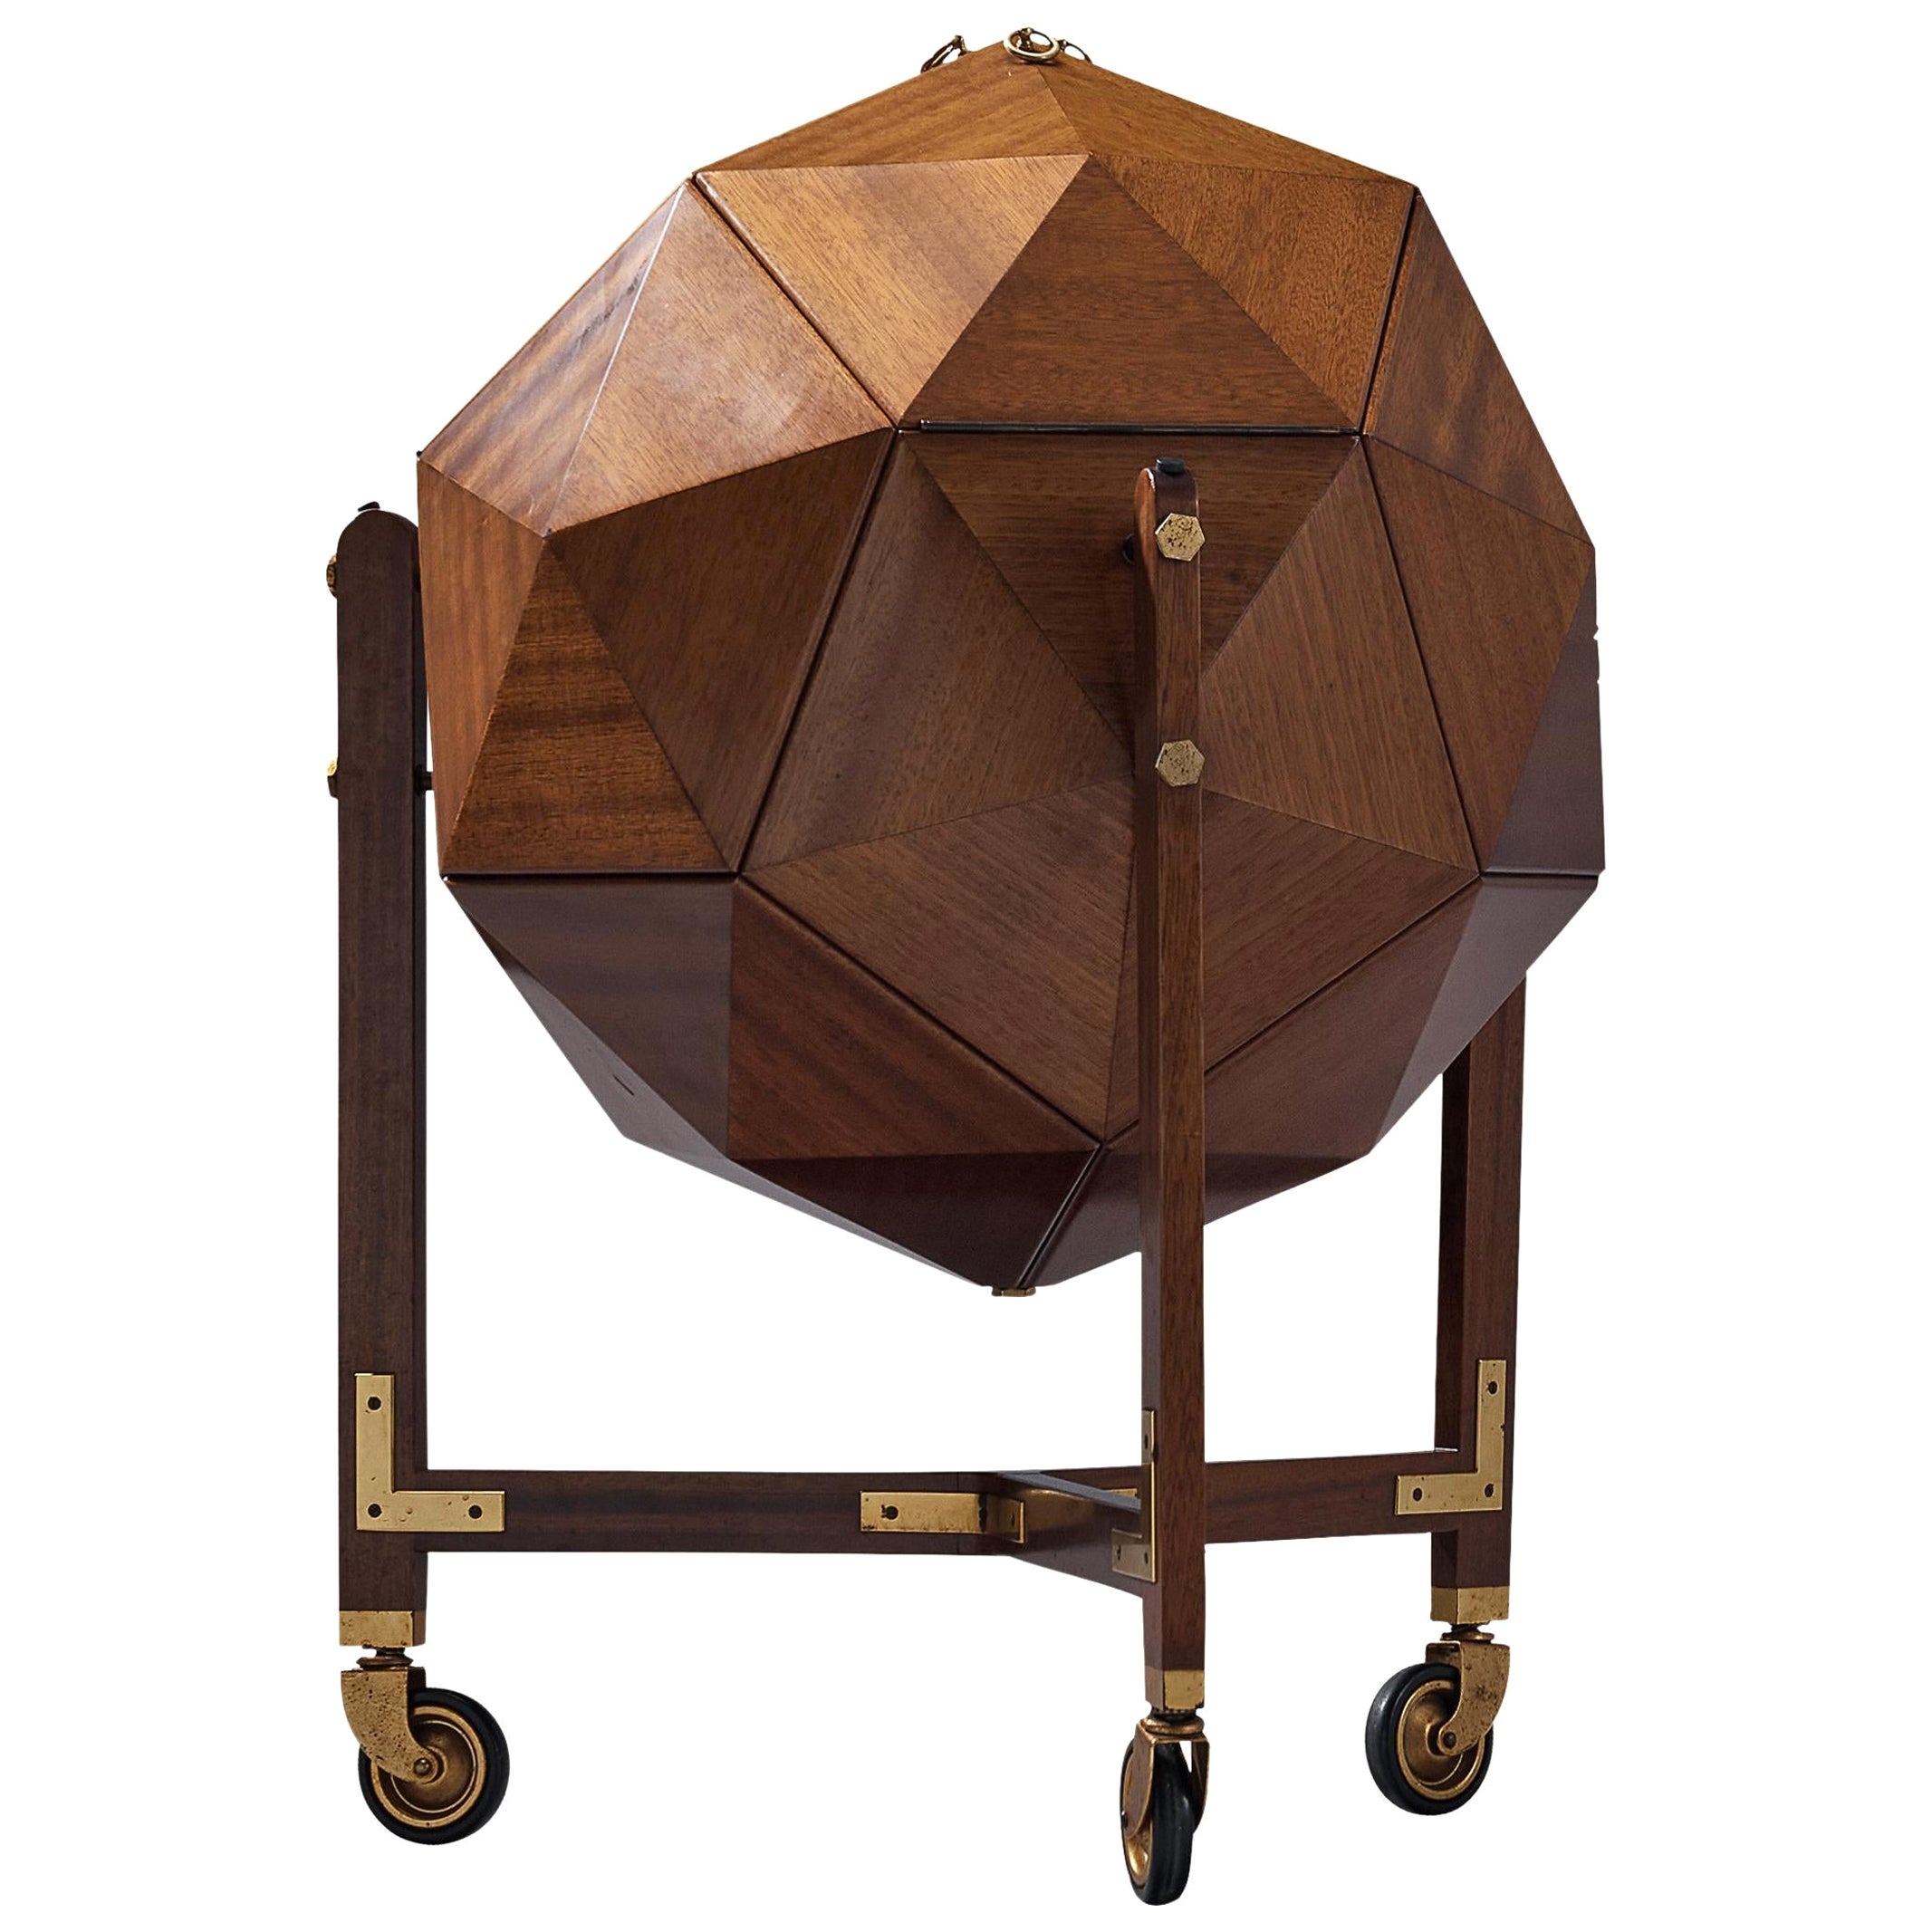 M. Vuillermoz Polyhedron Bar Cabinet in Mahogany and Brass